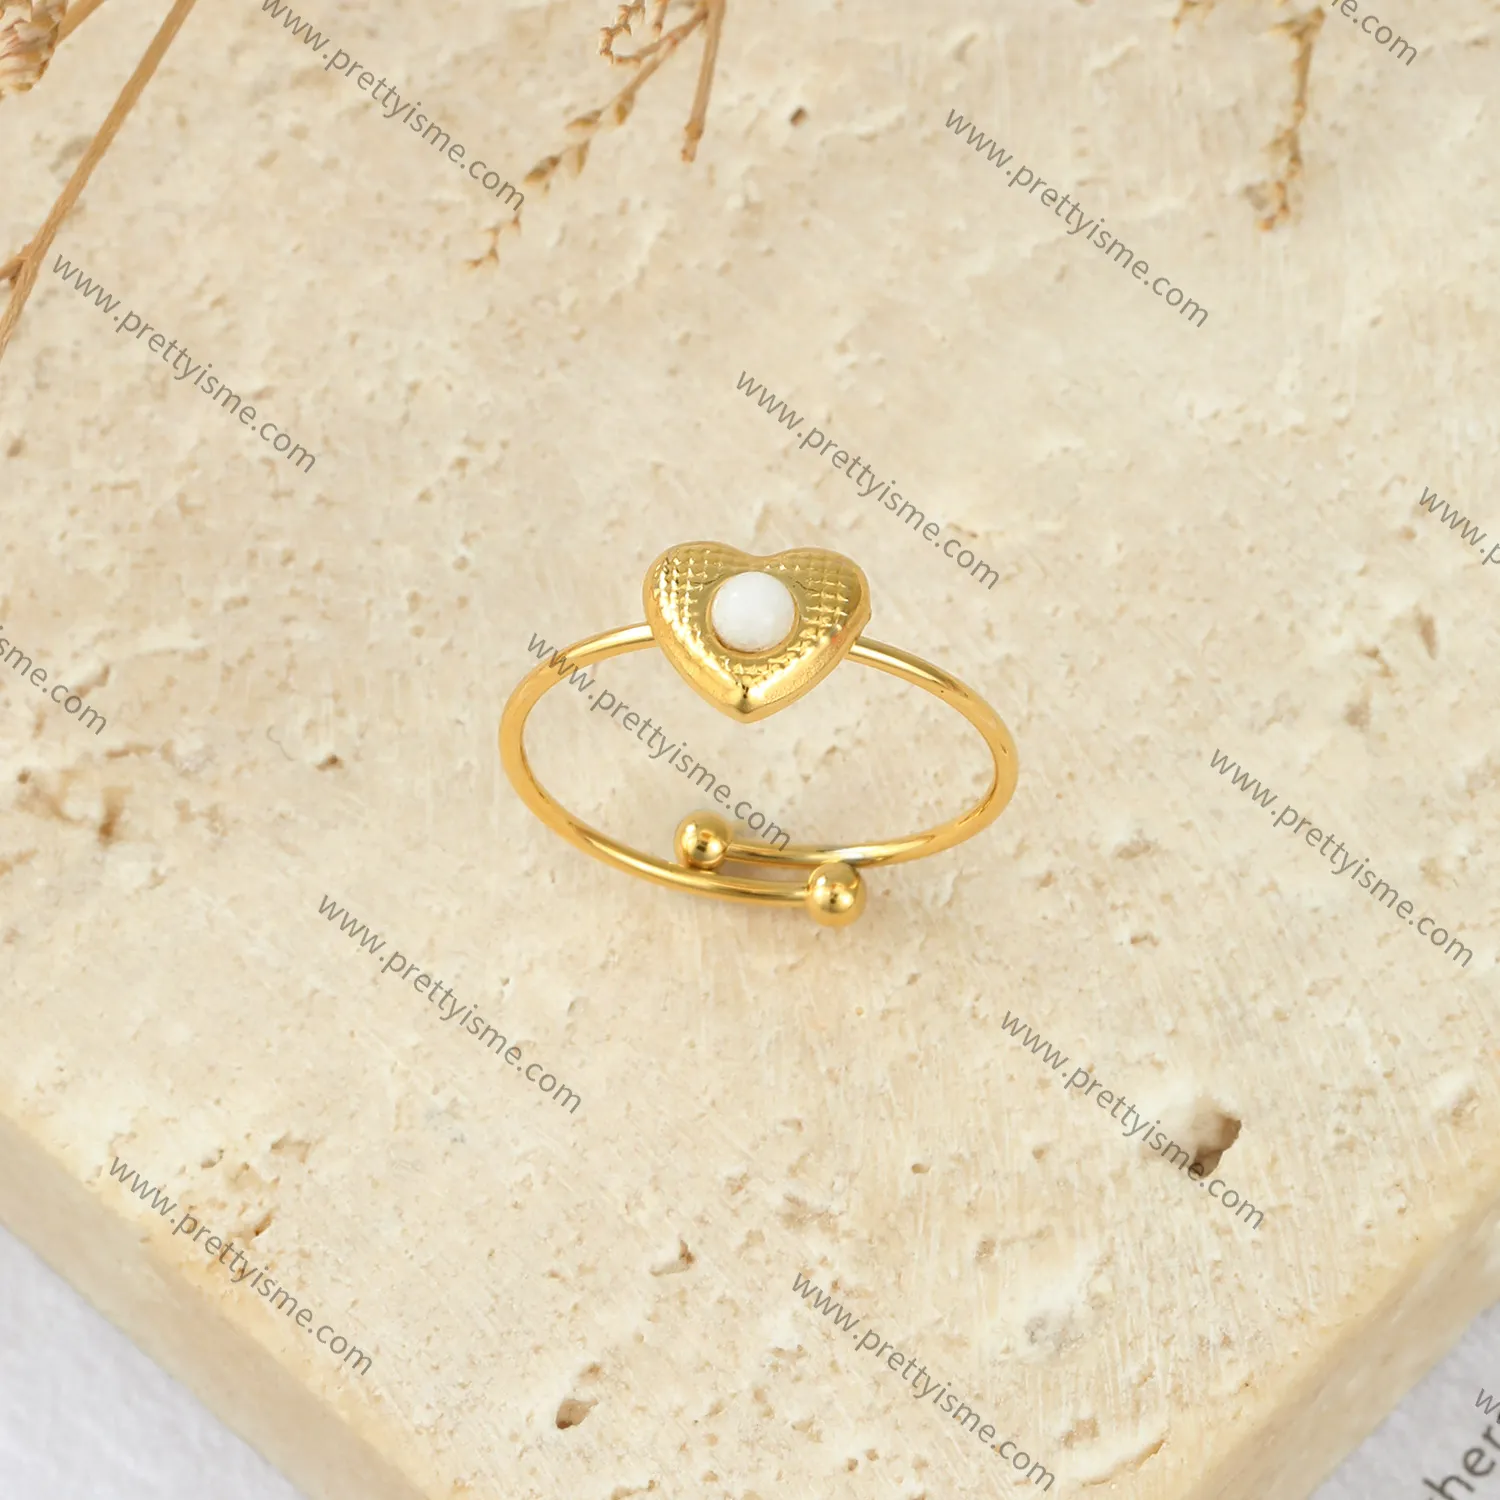 Lovely Stainless Steel Heart Ring in 18k Gold Plated Set with White Stones Open Ring (4).webp